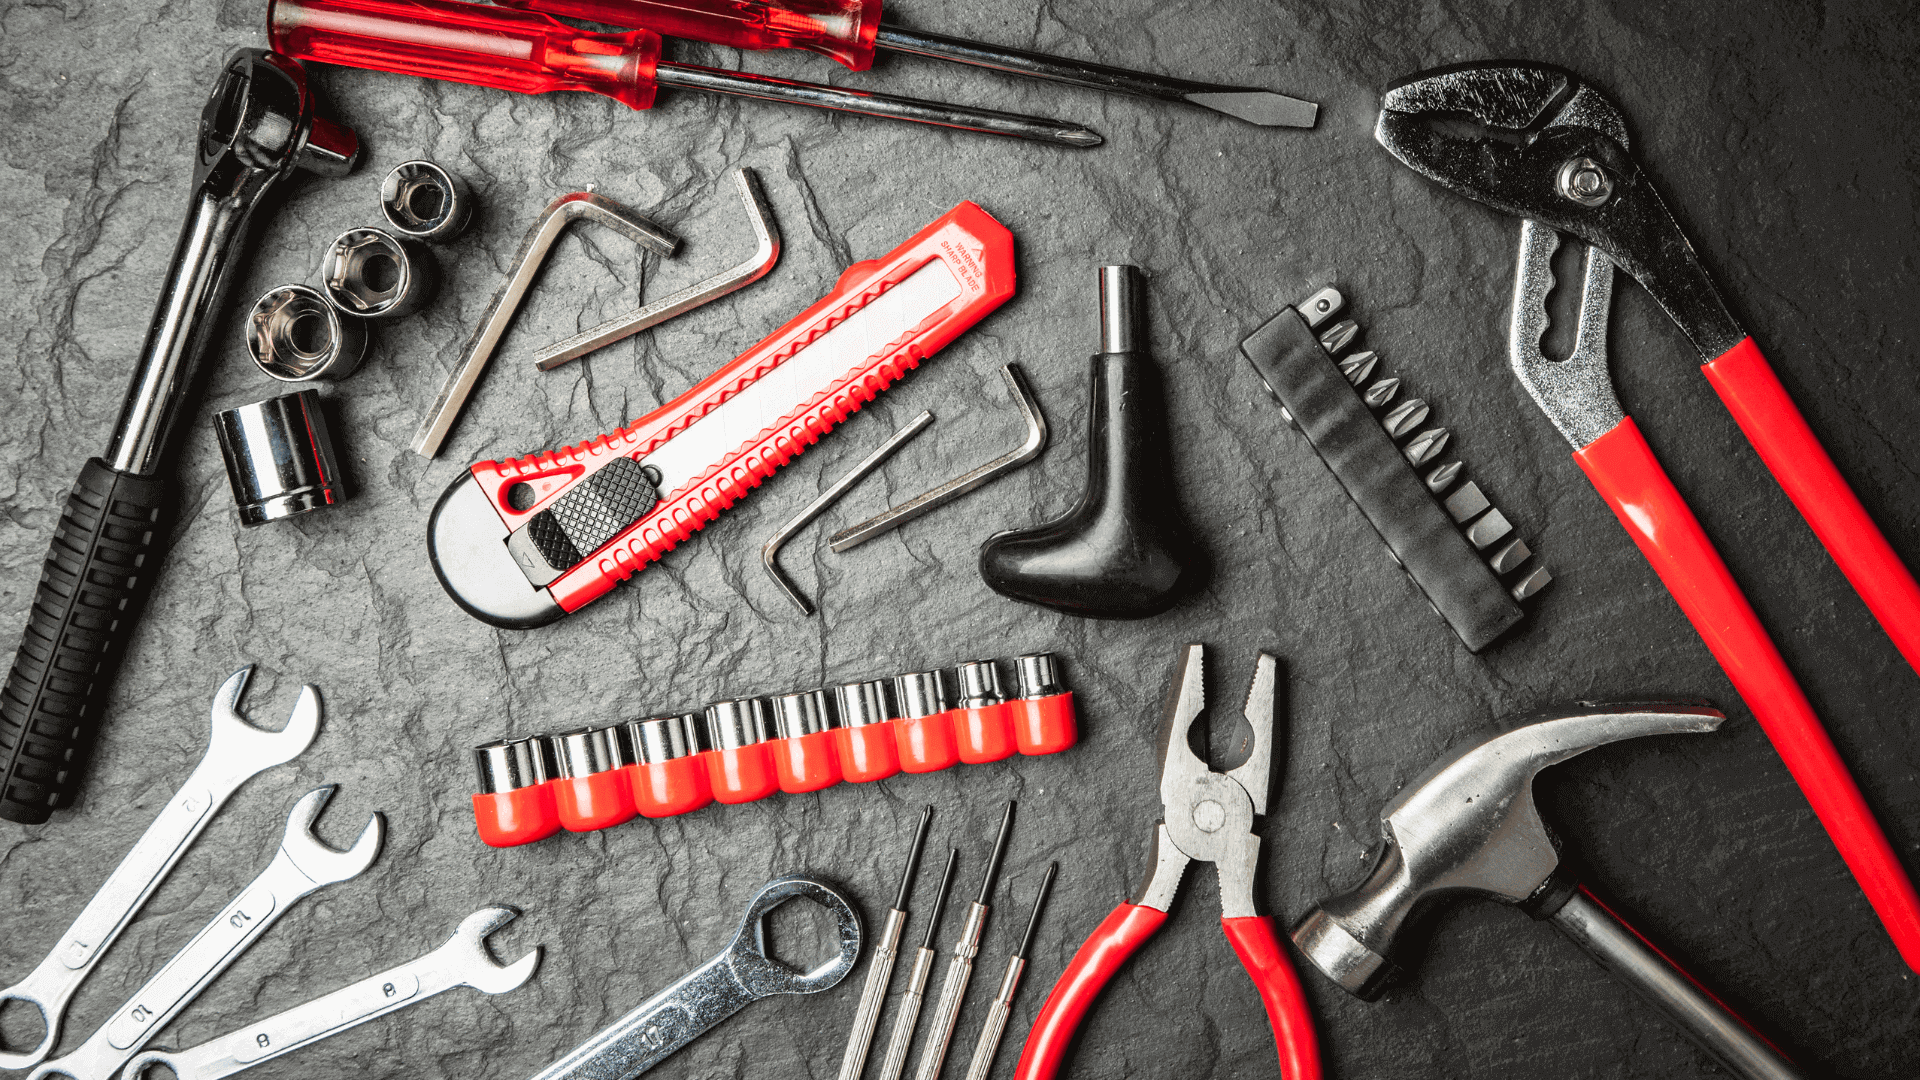 Dad loves his best friend home tool kits. Why don't you make a DIY for him